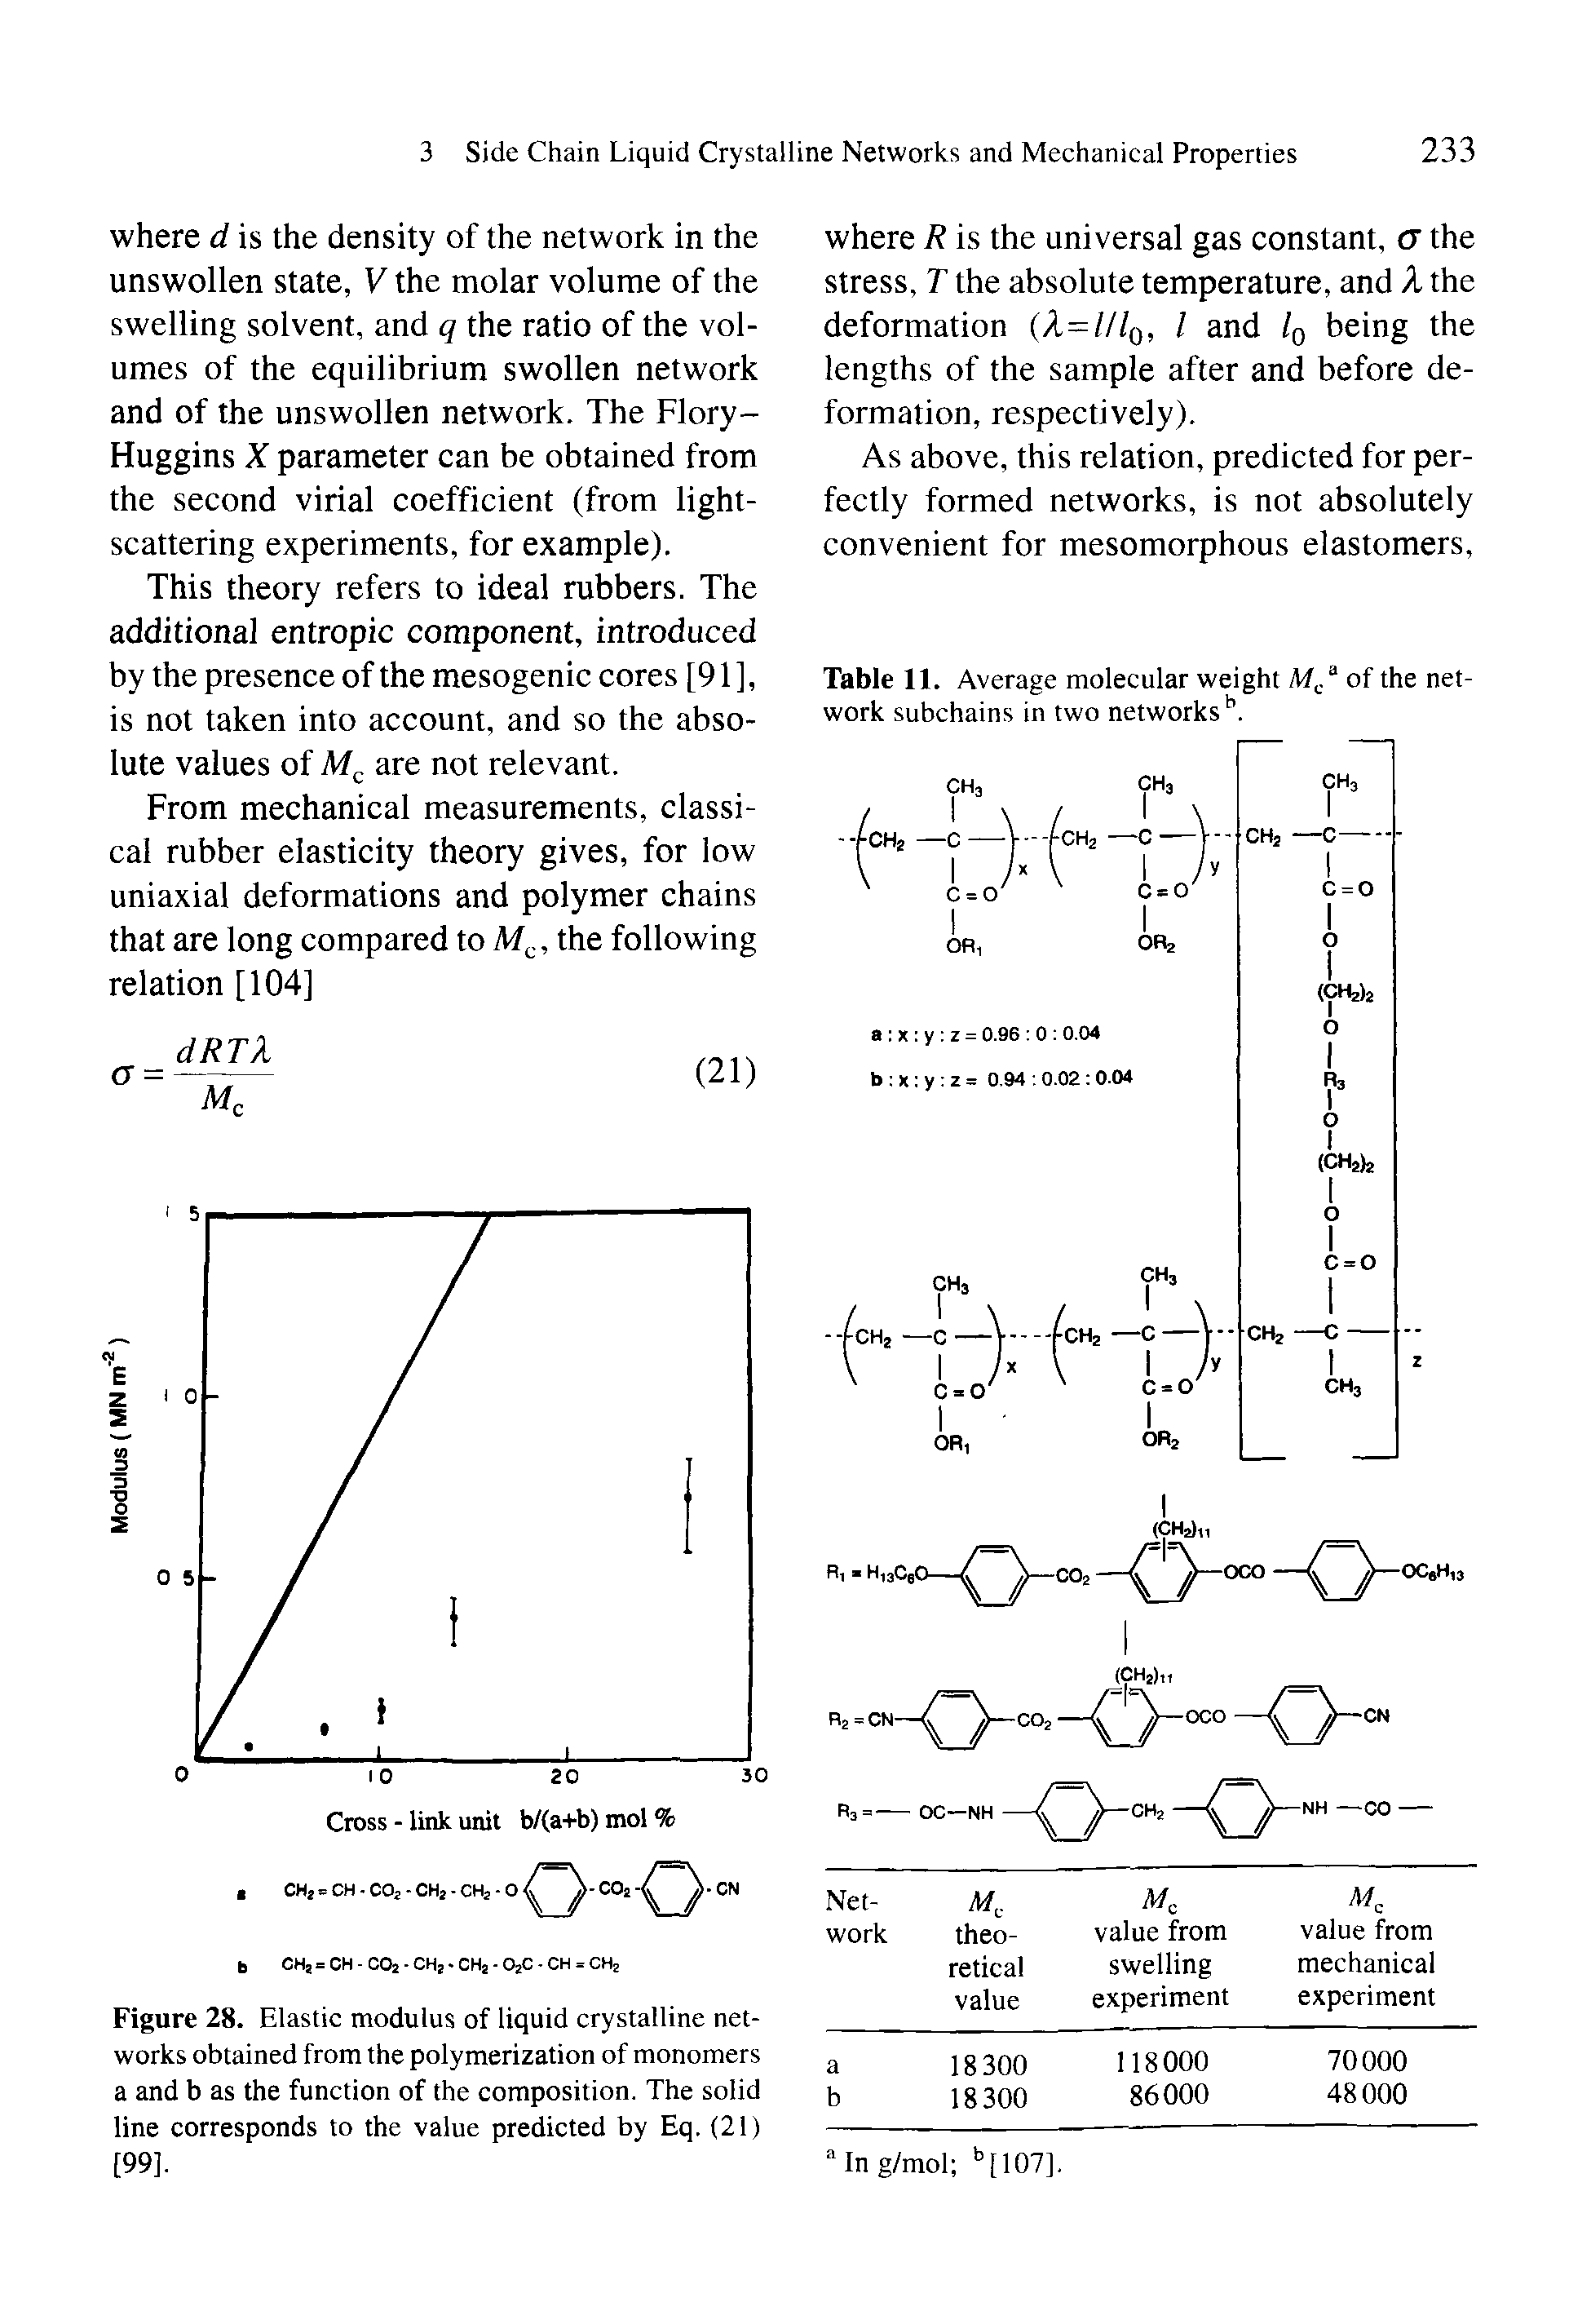 Figure 28. Elastic modulus of liquid crystalline networks obtained from the polymerization of monomers a and b as the function of the composition. The solid line corresponds to the value predicted by Eq. (21) [99].